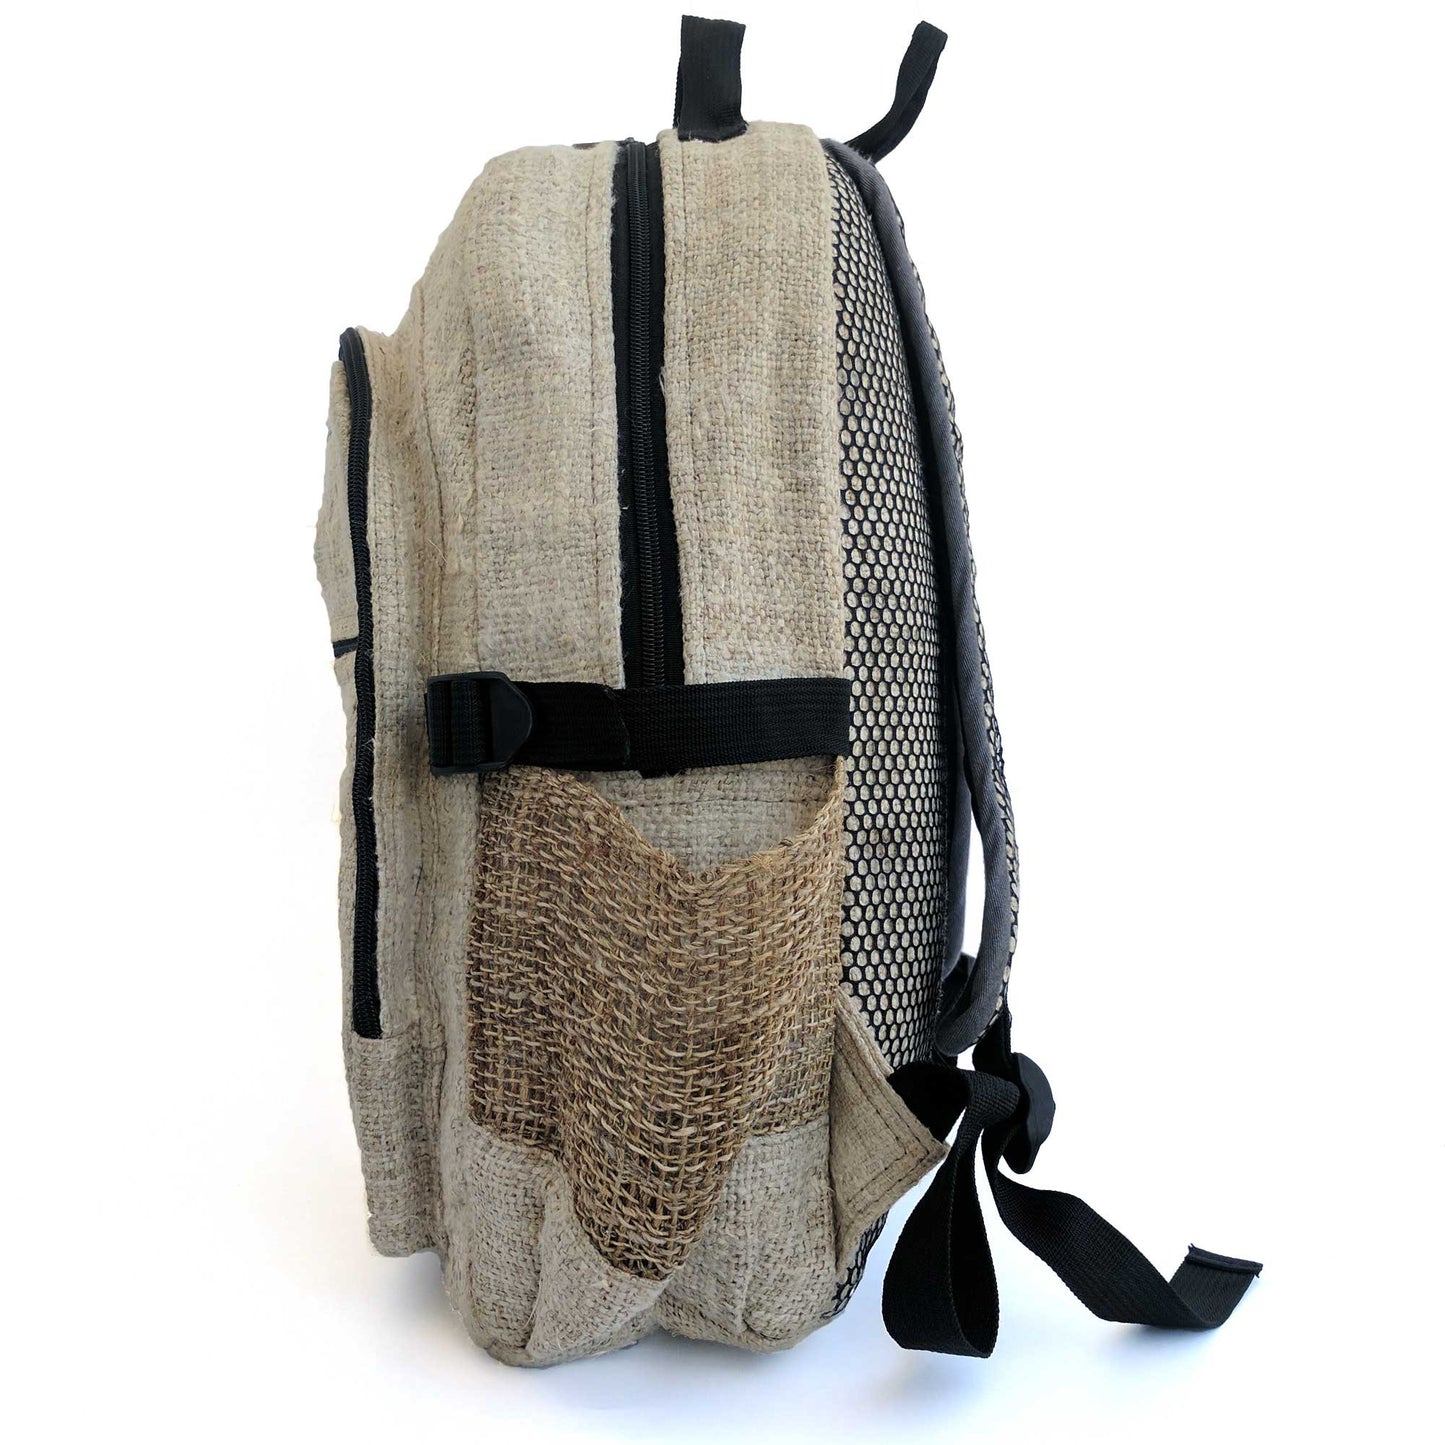 Hemp backpack made from 100% pure hand-woven Hemp side view